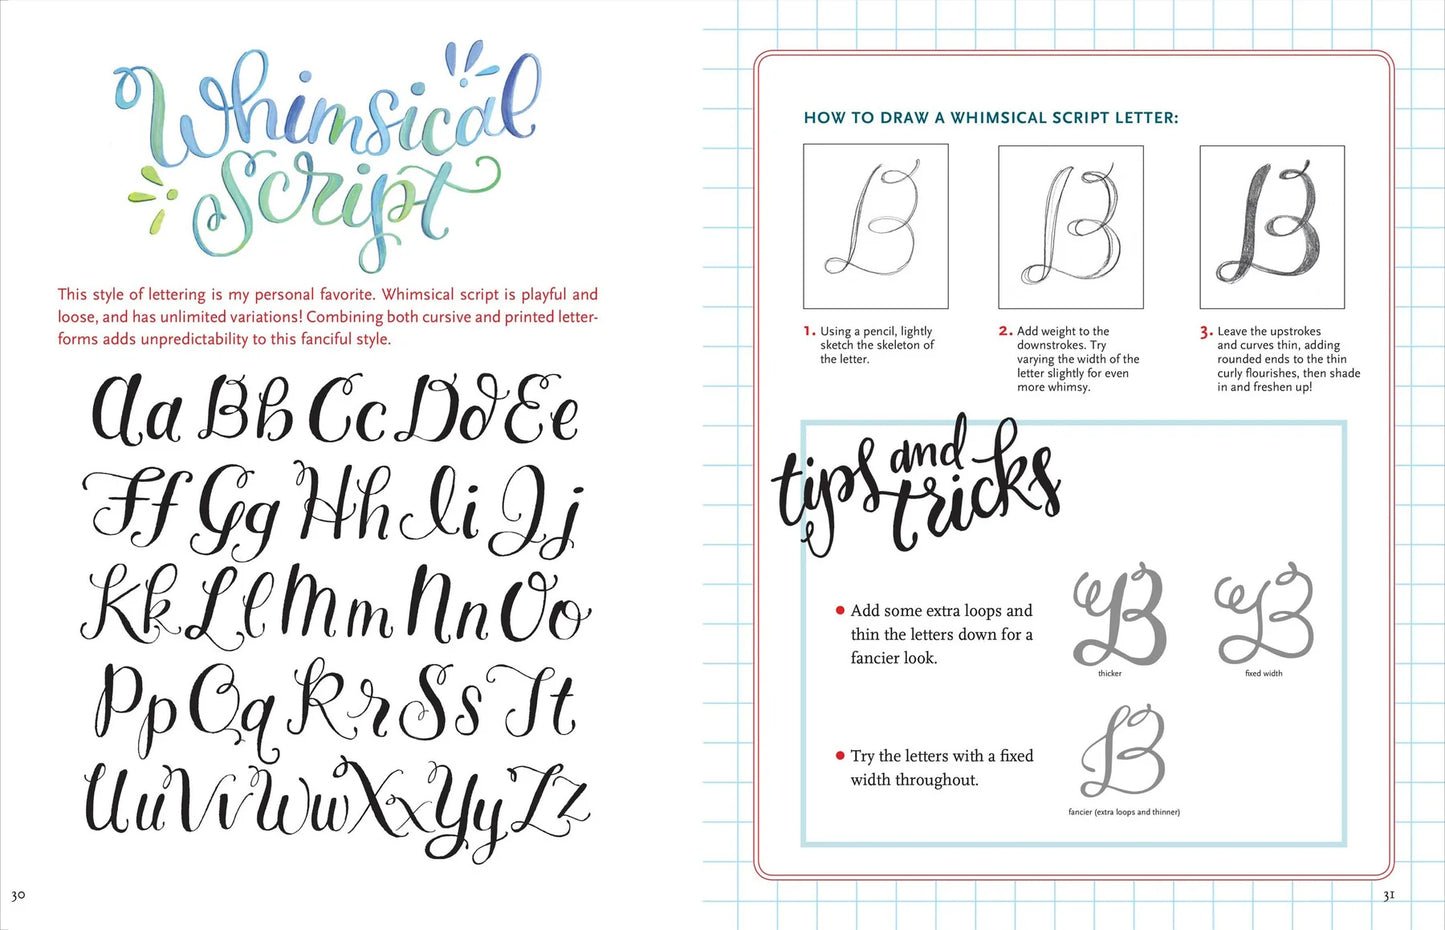 Book (Hardcover) - Hand Lettering